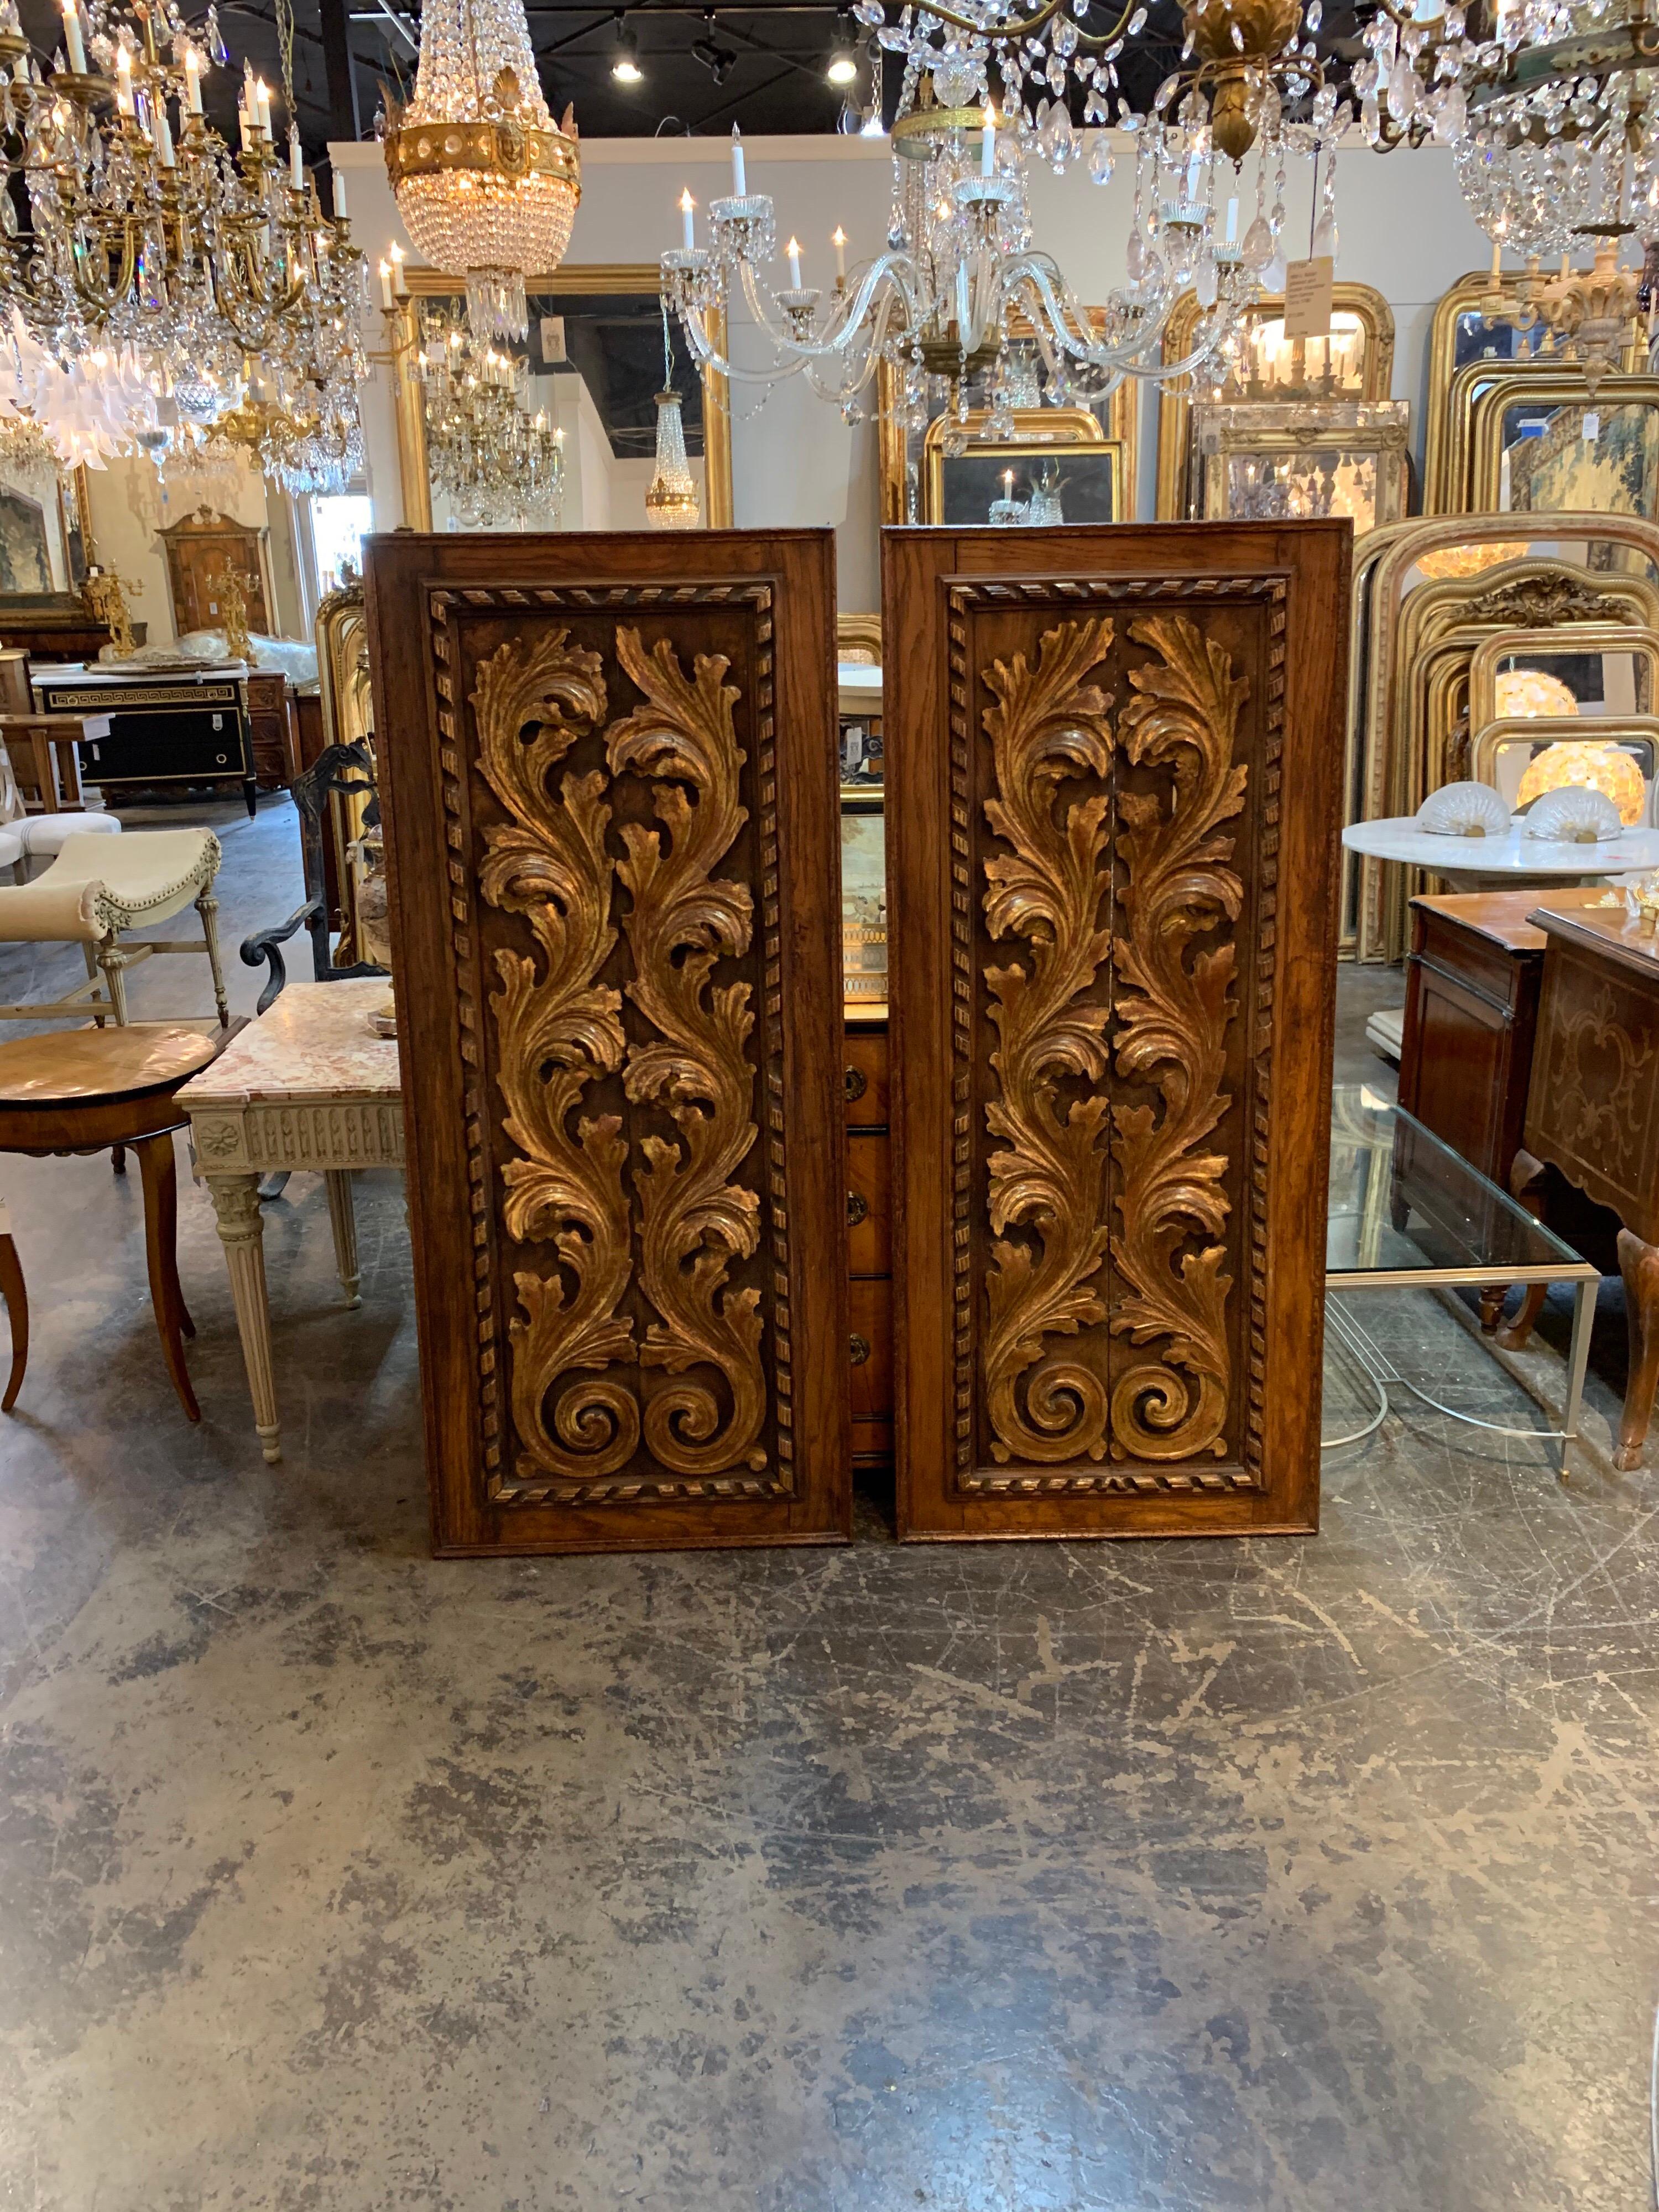 Handsome pair of large 19th century Italian carved oak Baroque panels. Exceptional carvings on a rich brown panel. A beautiful design element!